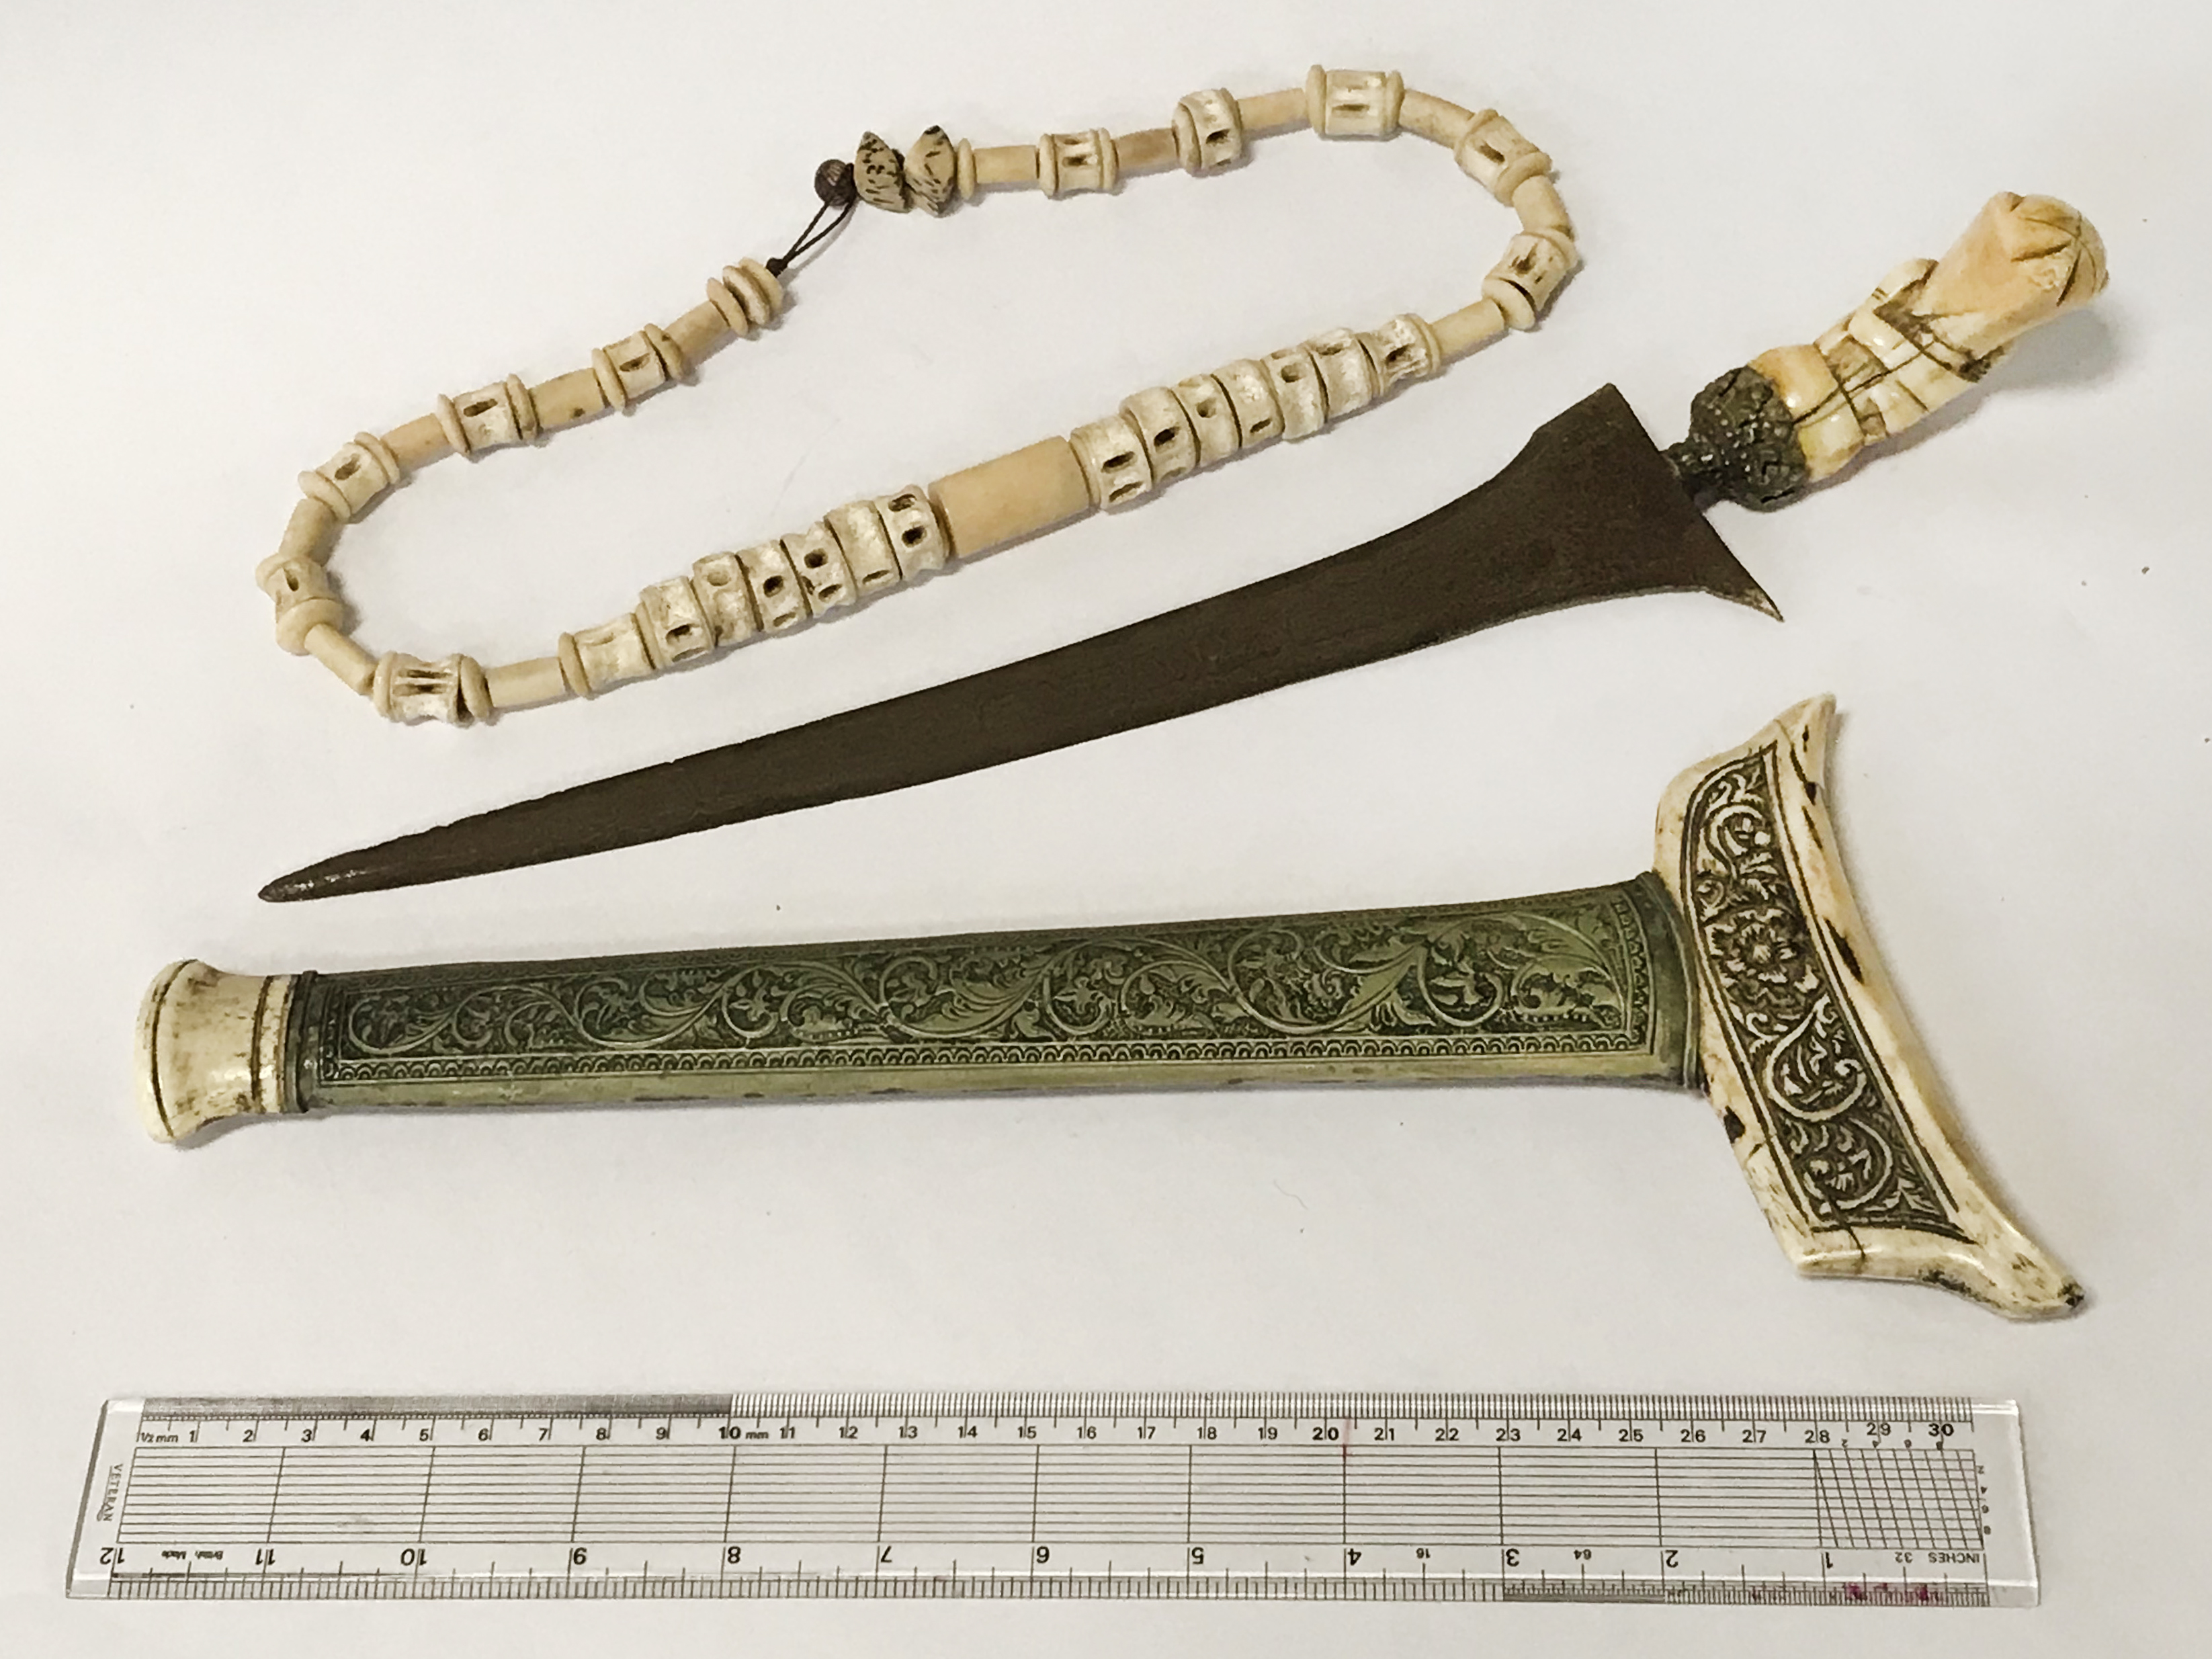 MALAYSIAN / INDONESIAN KRIS DAGGER WITH AN ETHNIC NECKLACE